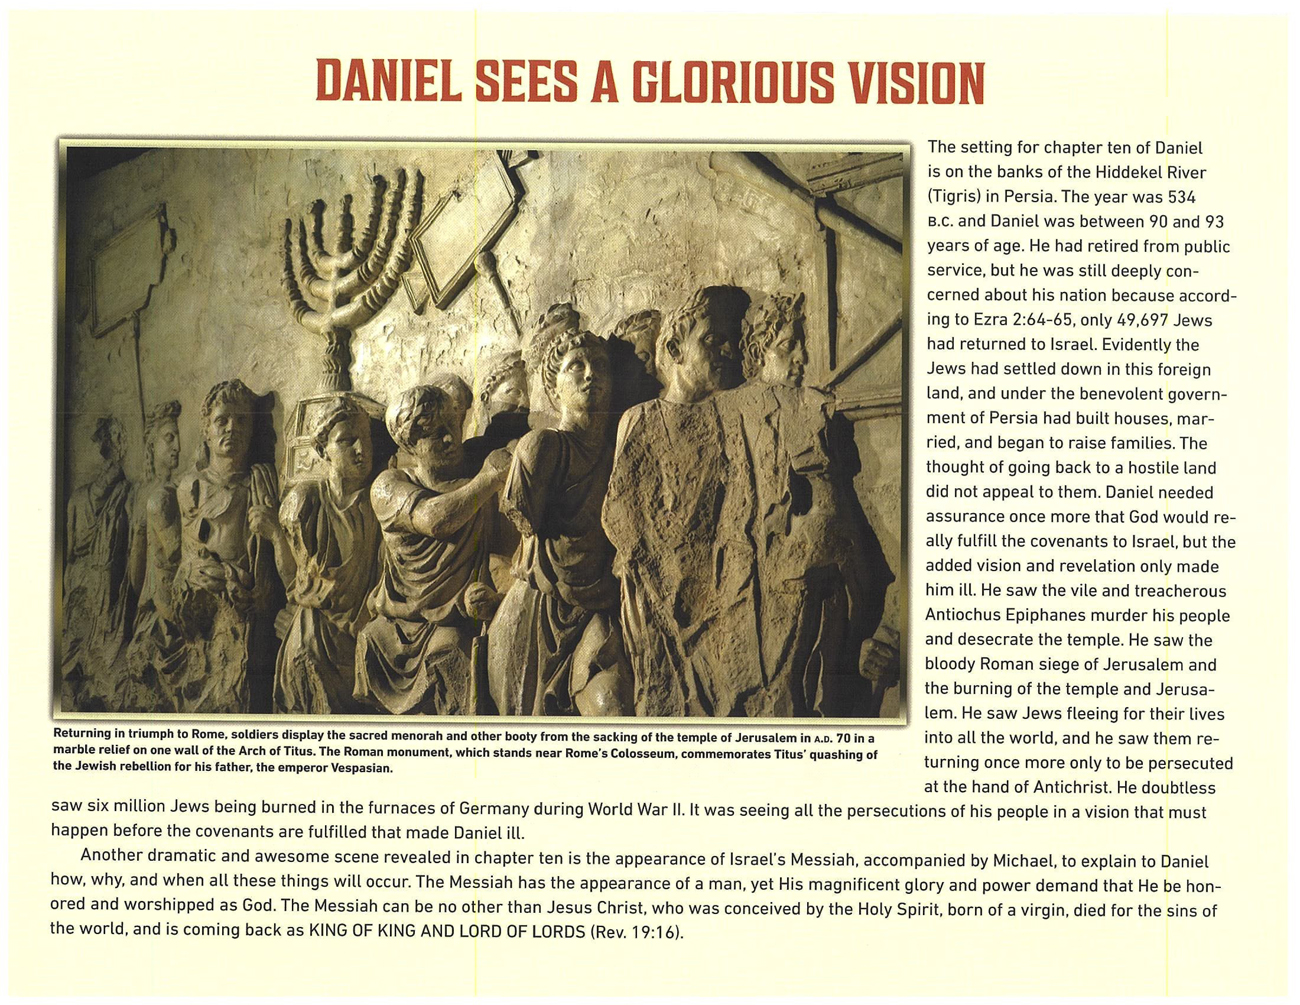 2021 Prophecy Calendar: October - Daniel Sees a glorious Vision